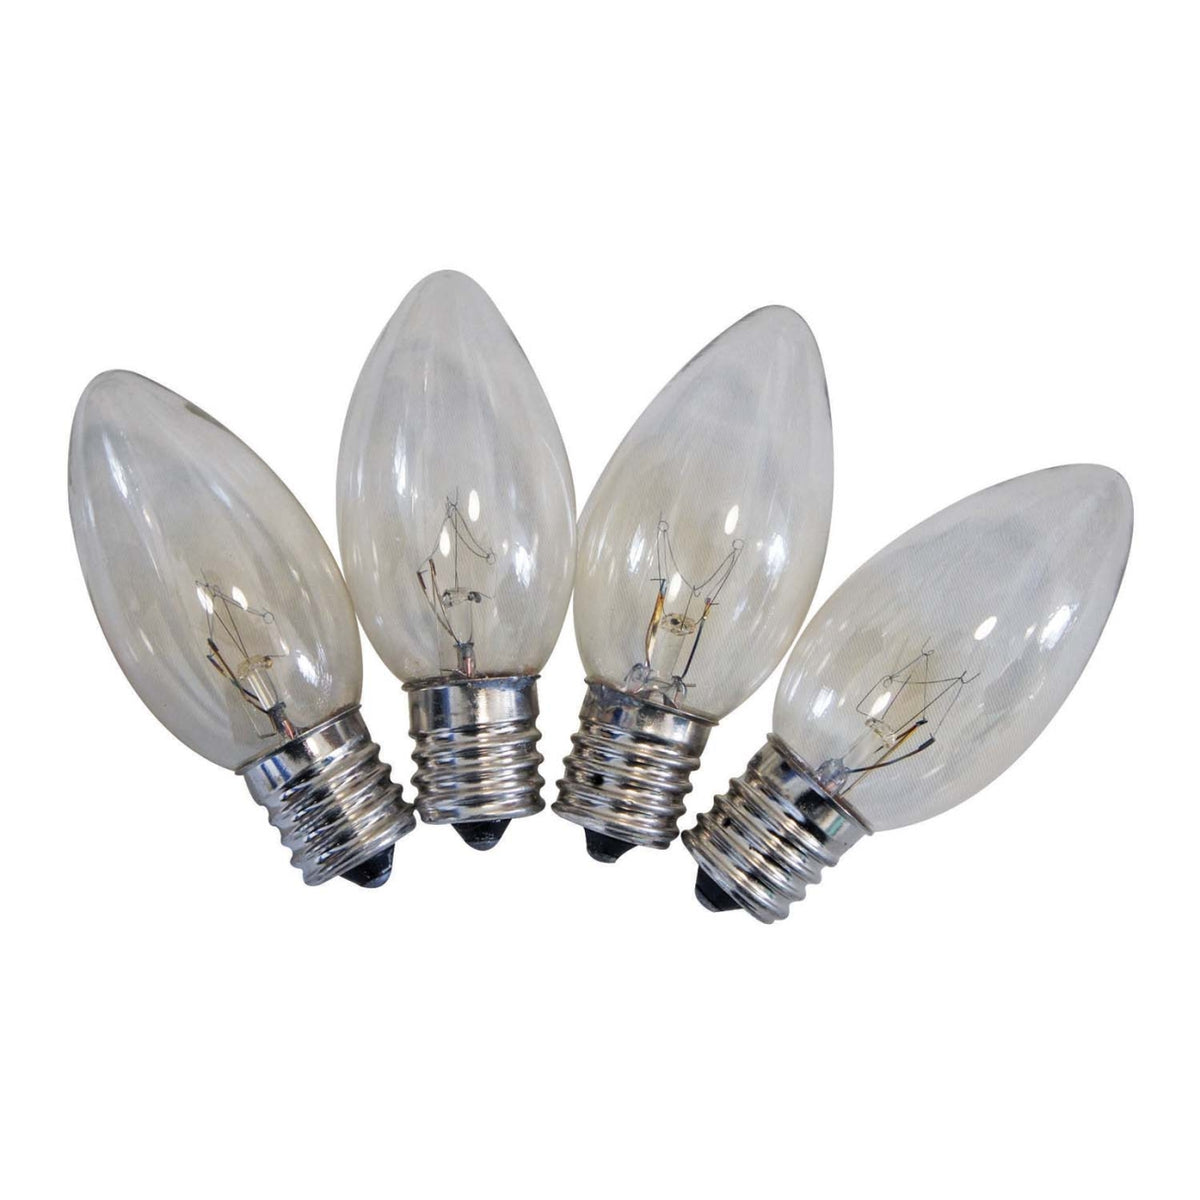 Celebrations UTRYL1A2 C9 Replacement Bulbs, 4 W, Twinkle, White